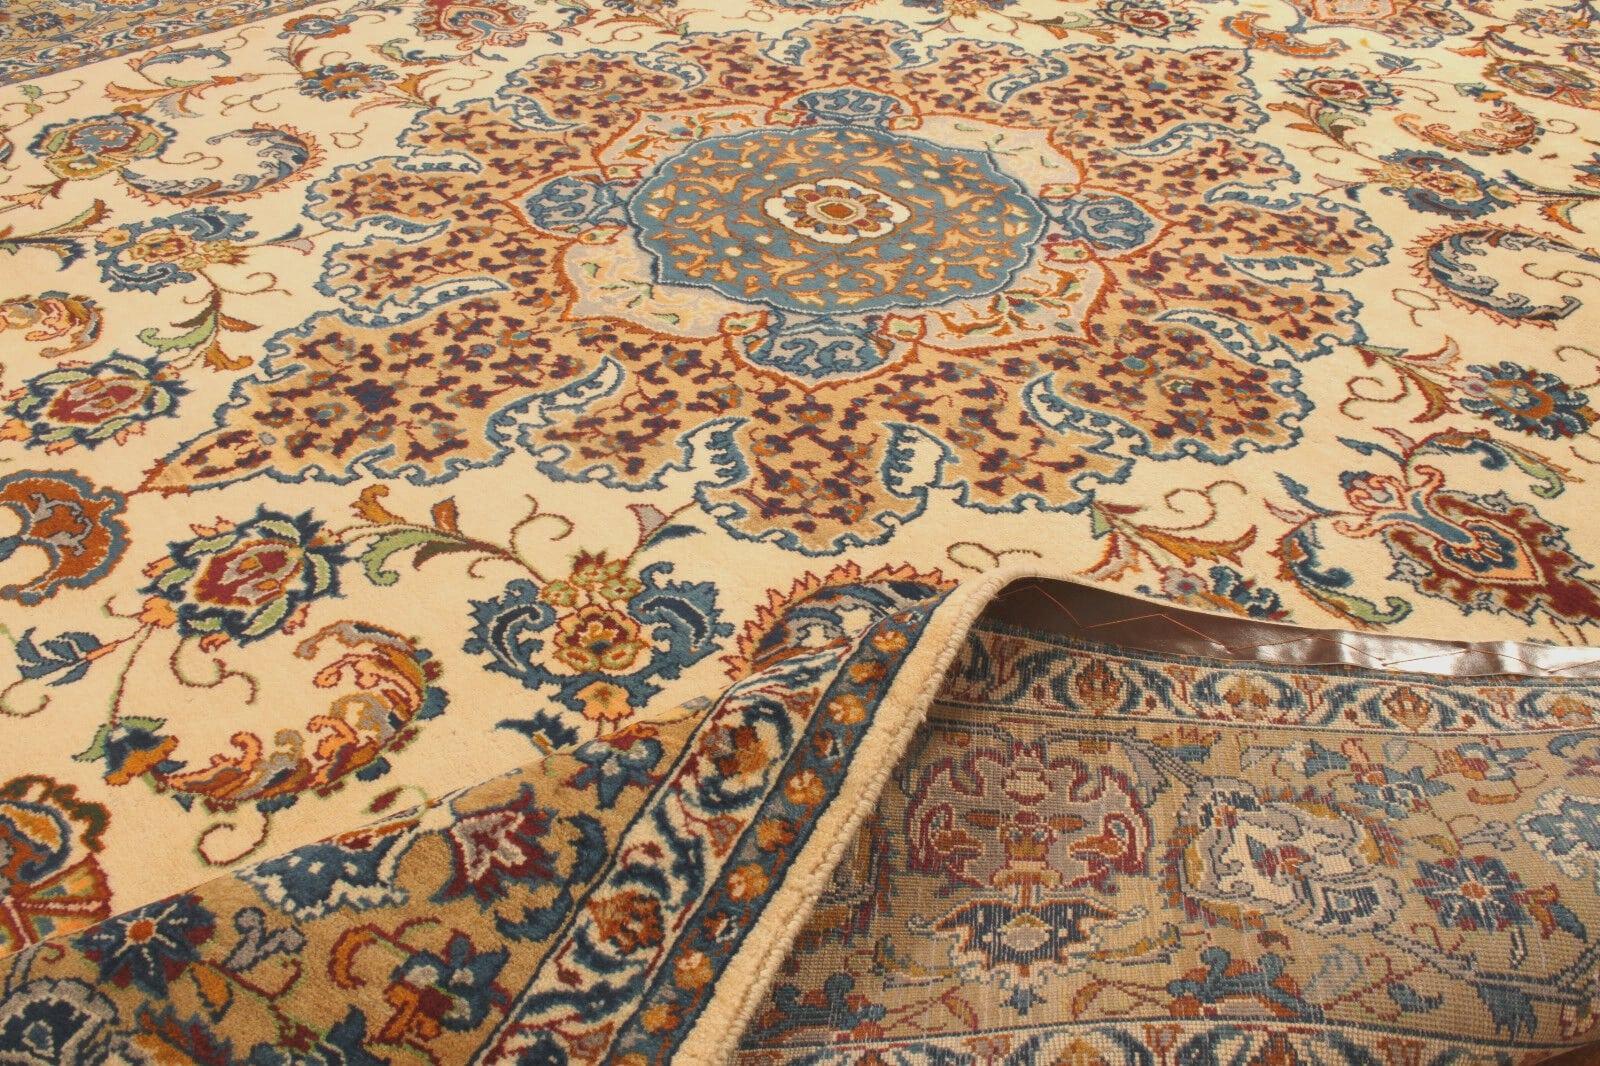 Wool Handmade Vintage Persian Style Isfahan Rug 9.9' x 13.7', 1990s - 1T45 For Sale